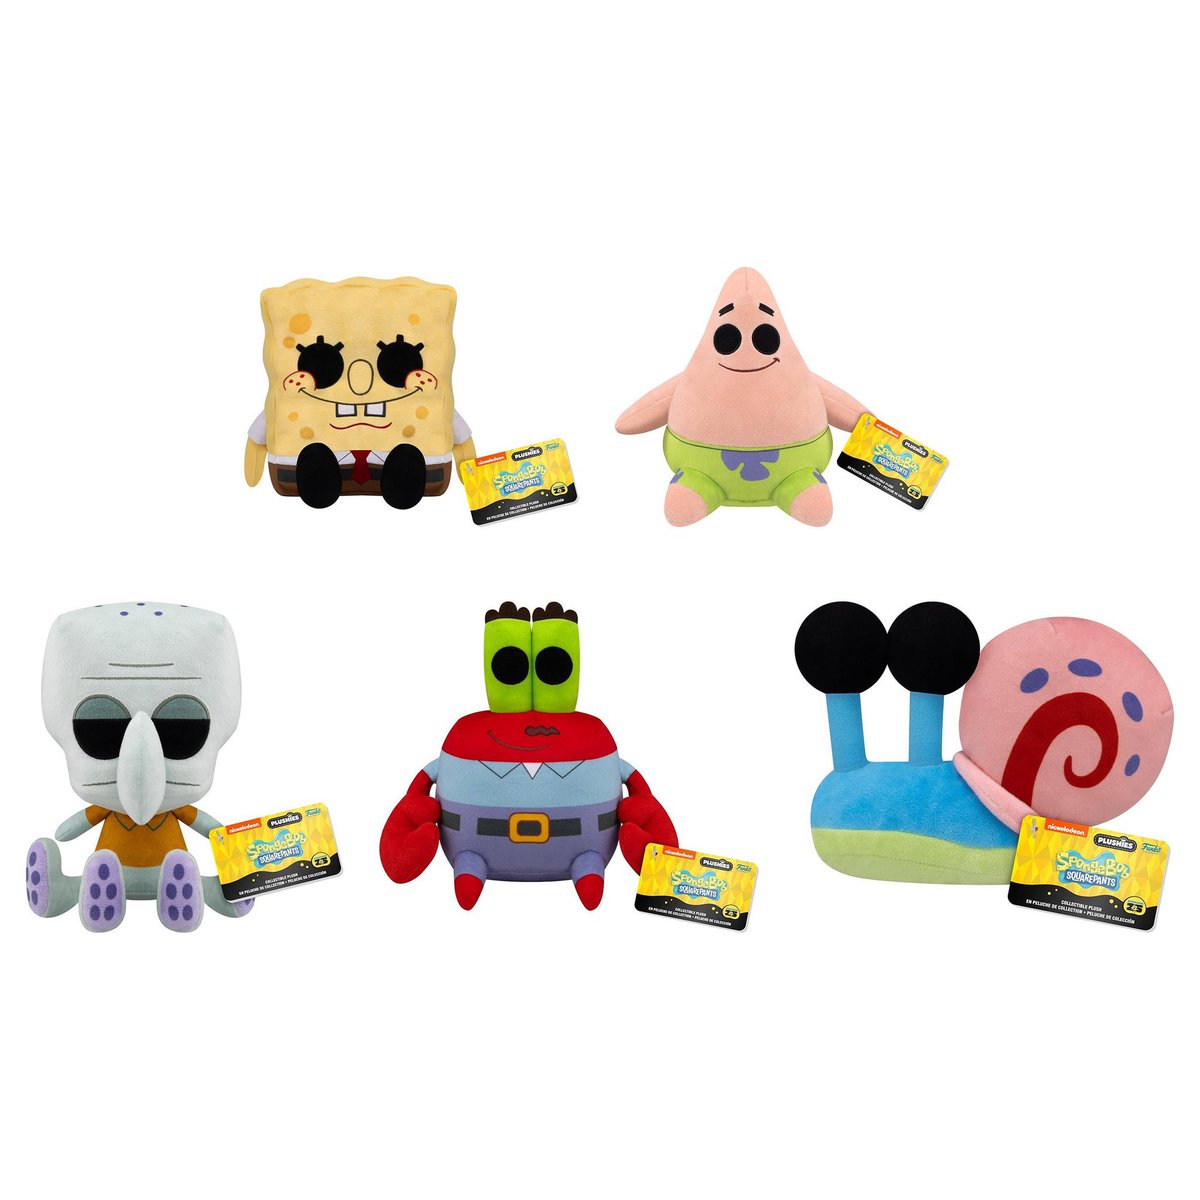 Preorder Now: SpongeBob SquarePants 25th Anniversary Funko Pop!, Plush, Mystery Minis, and more! 📦 Amazon: amzn.to/3R4apeh 🌎 Ent Earth: ee.toys/7HWBYS 🎮 GameStop: finderz.info/3vGioXj 🦇 Hot Topic: finderz.info/3Vhk6Zx * No Charge Until it Ships